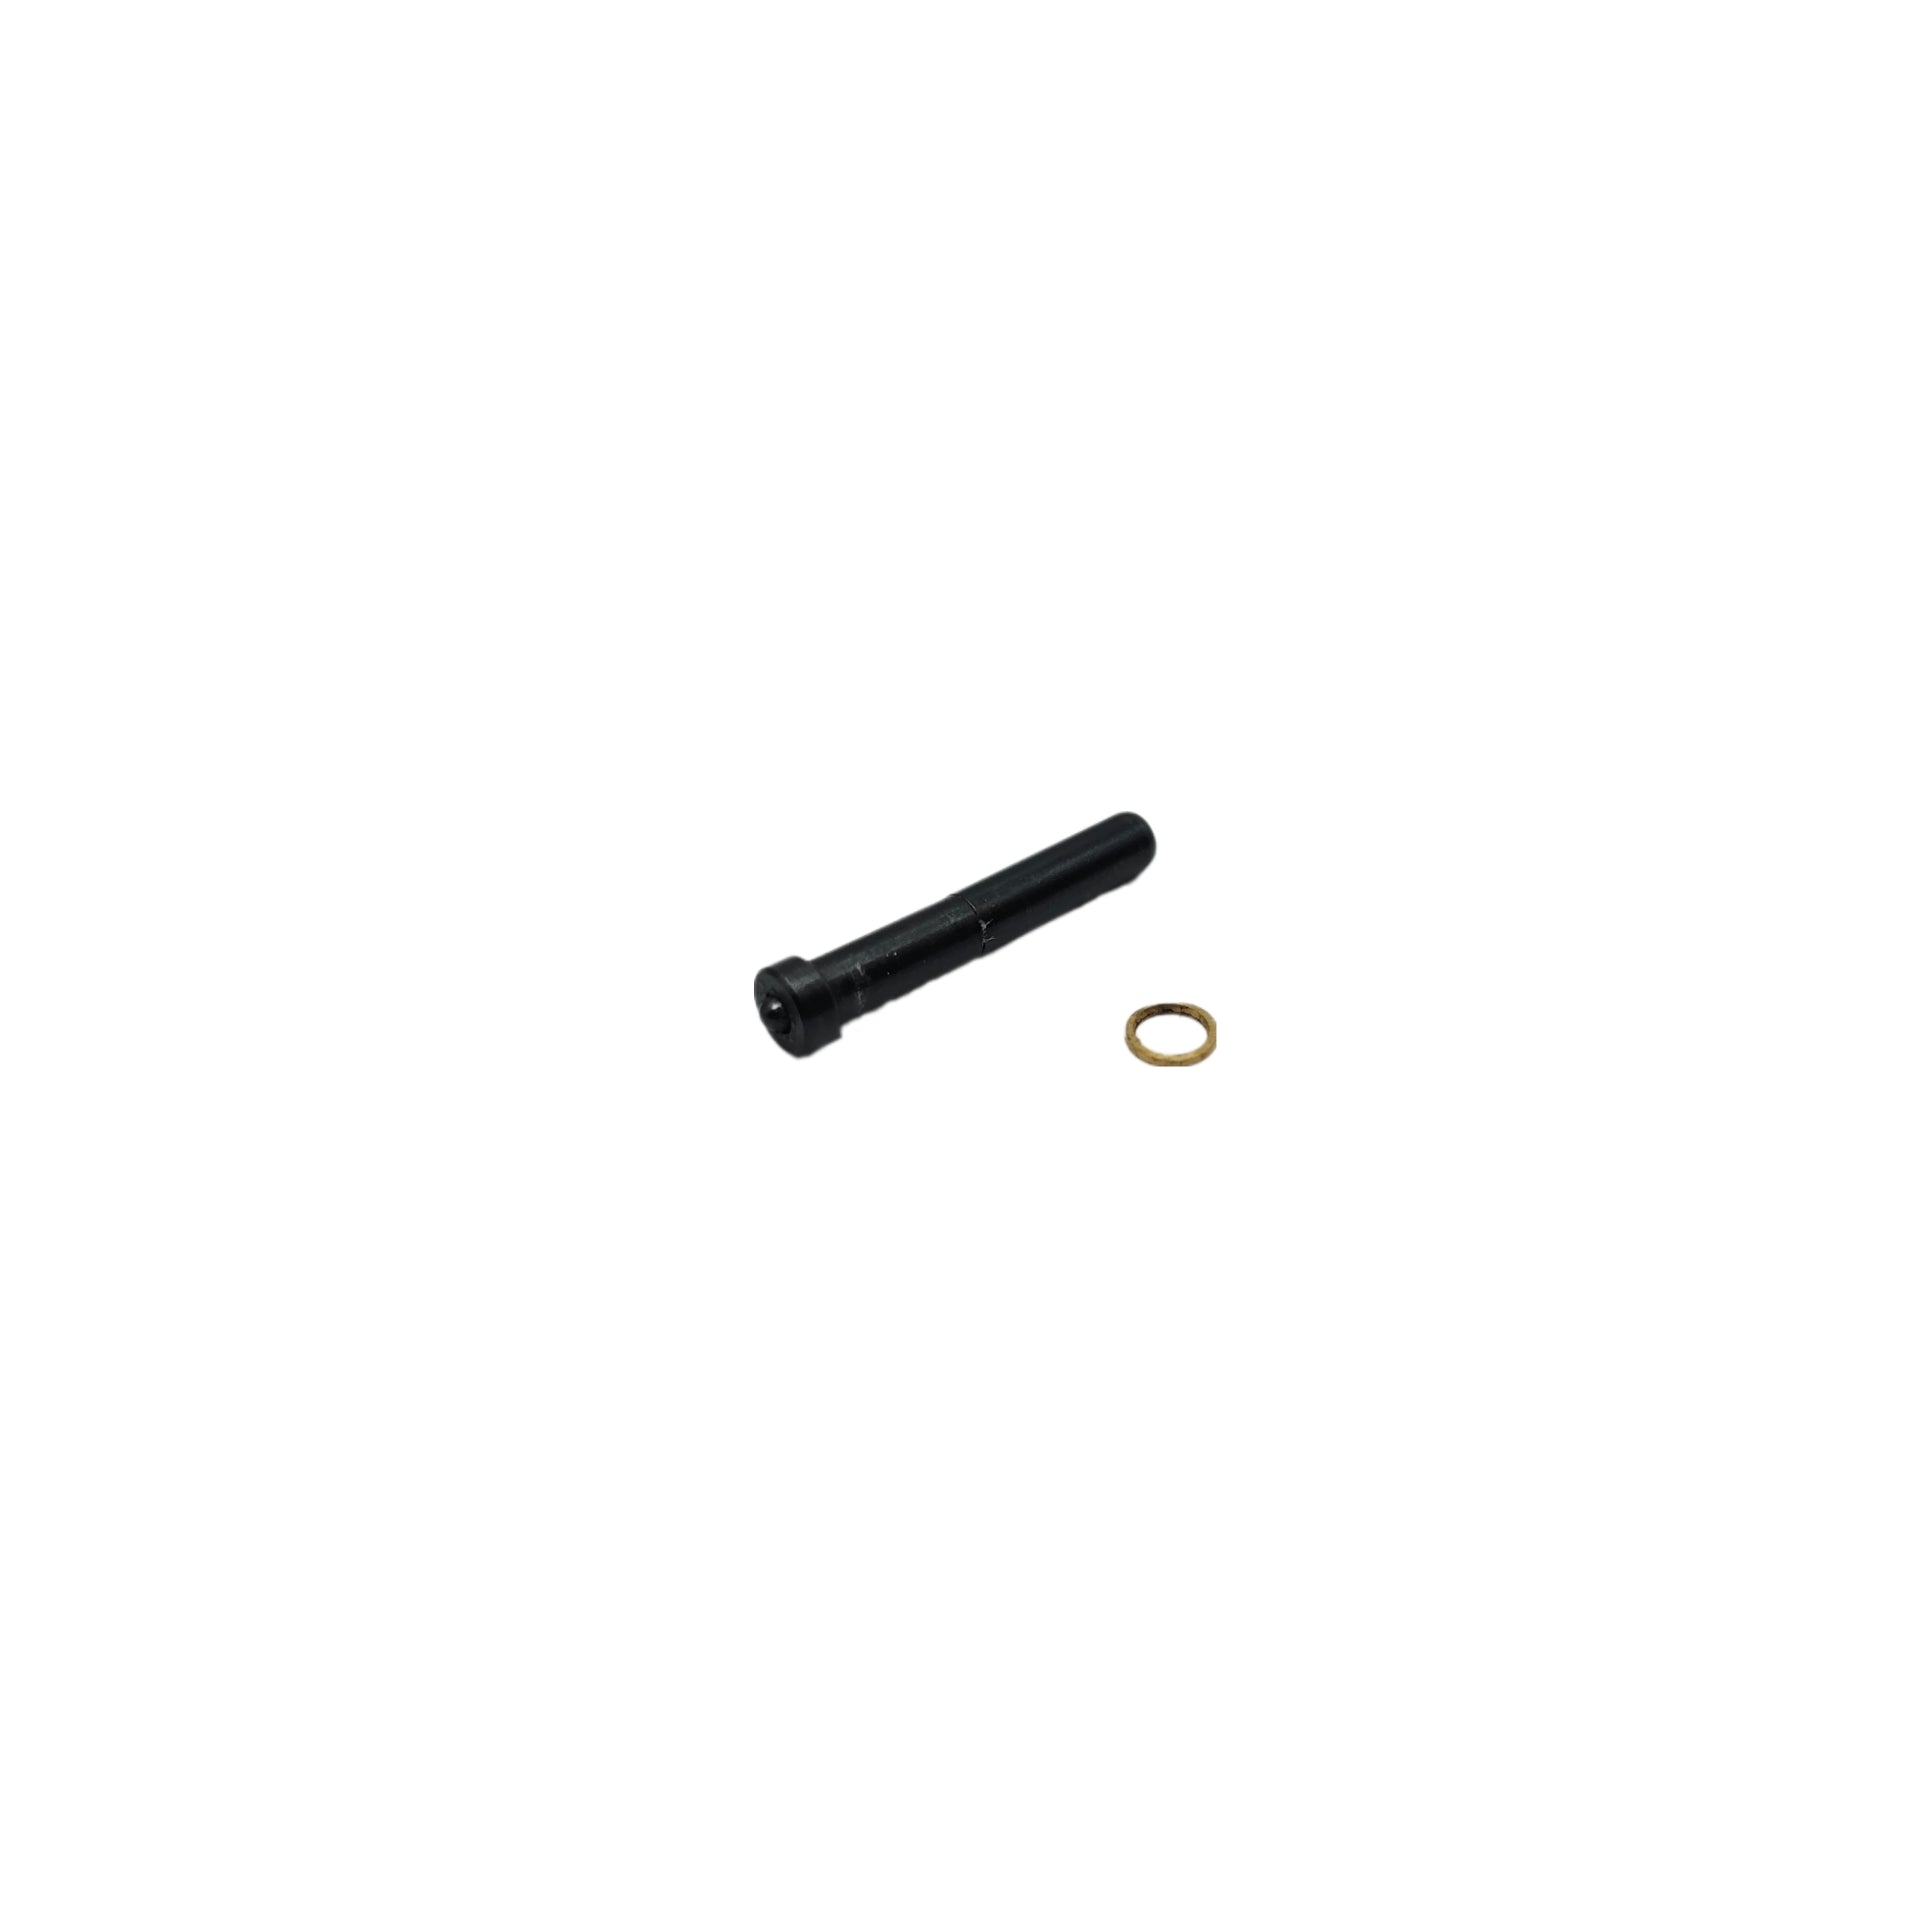 WE Hi-Capa Full Auto Series Replacement Part - 227 228 - Hammer Pin And Brass Spacer